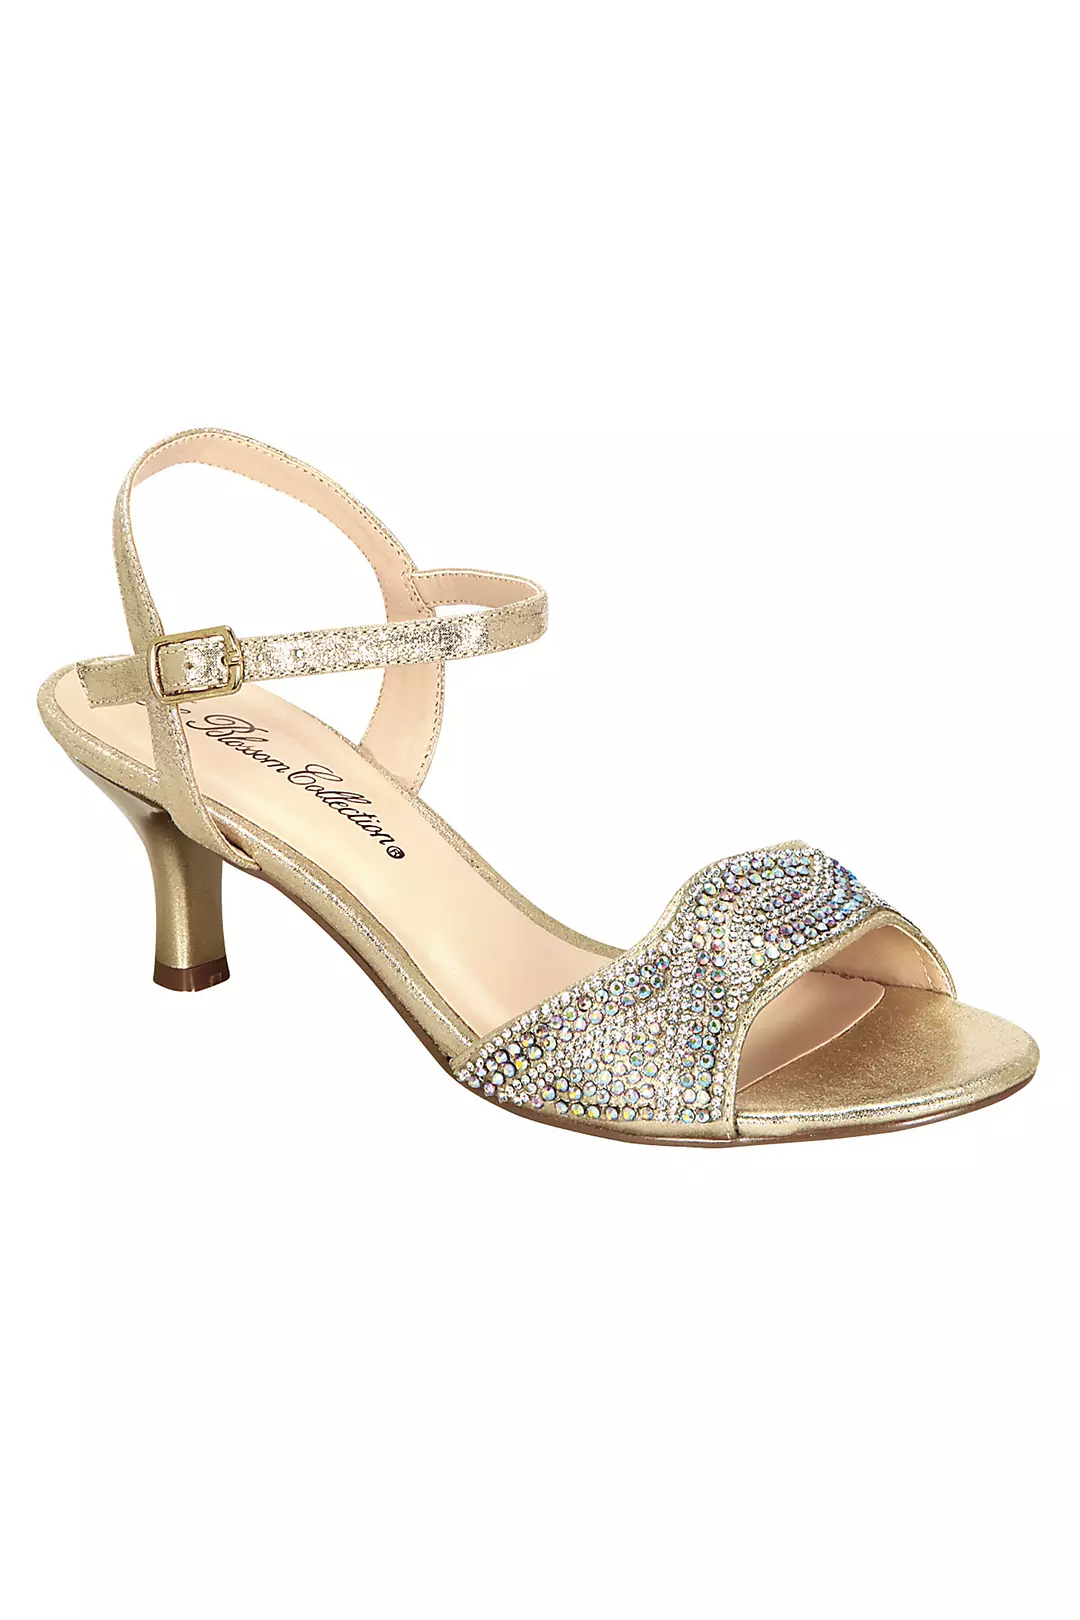 Low Heel Quarter Strap Sandal with AB Crystals Image